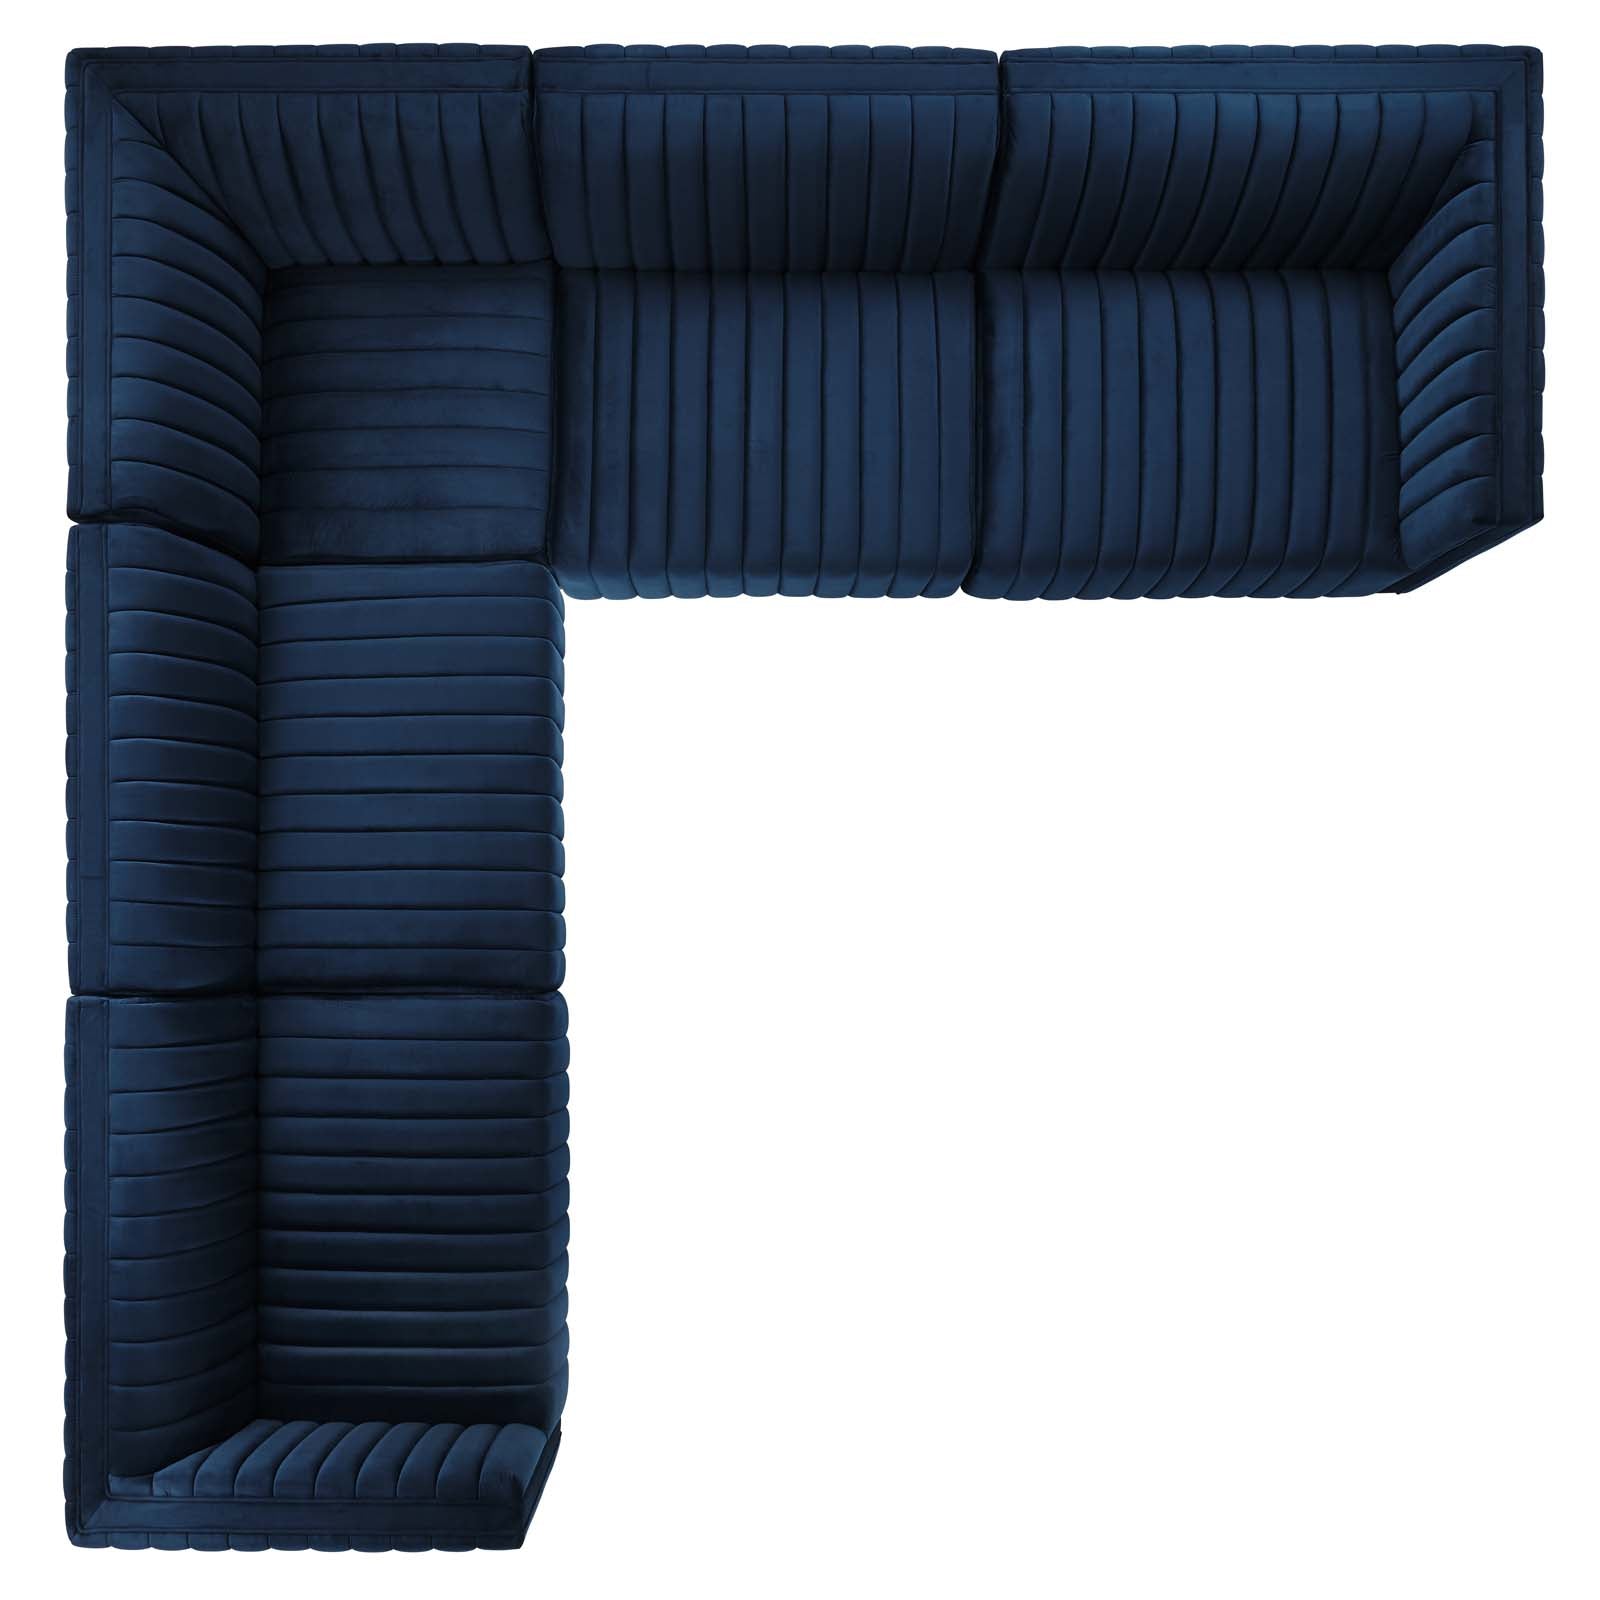 Modway Sectional Sofas - Conjure Channel Tufted 109" W Performance Velvet 5-Piece Sectional Black Midnight Blue